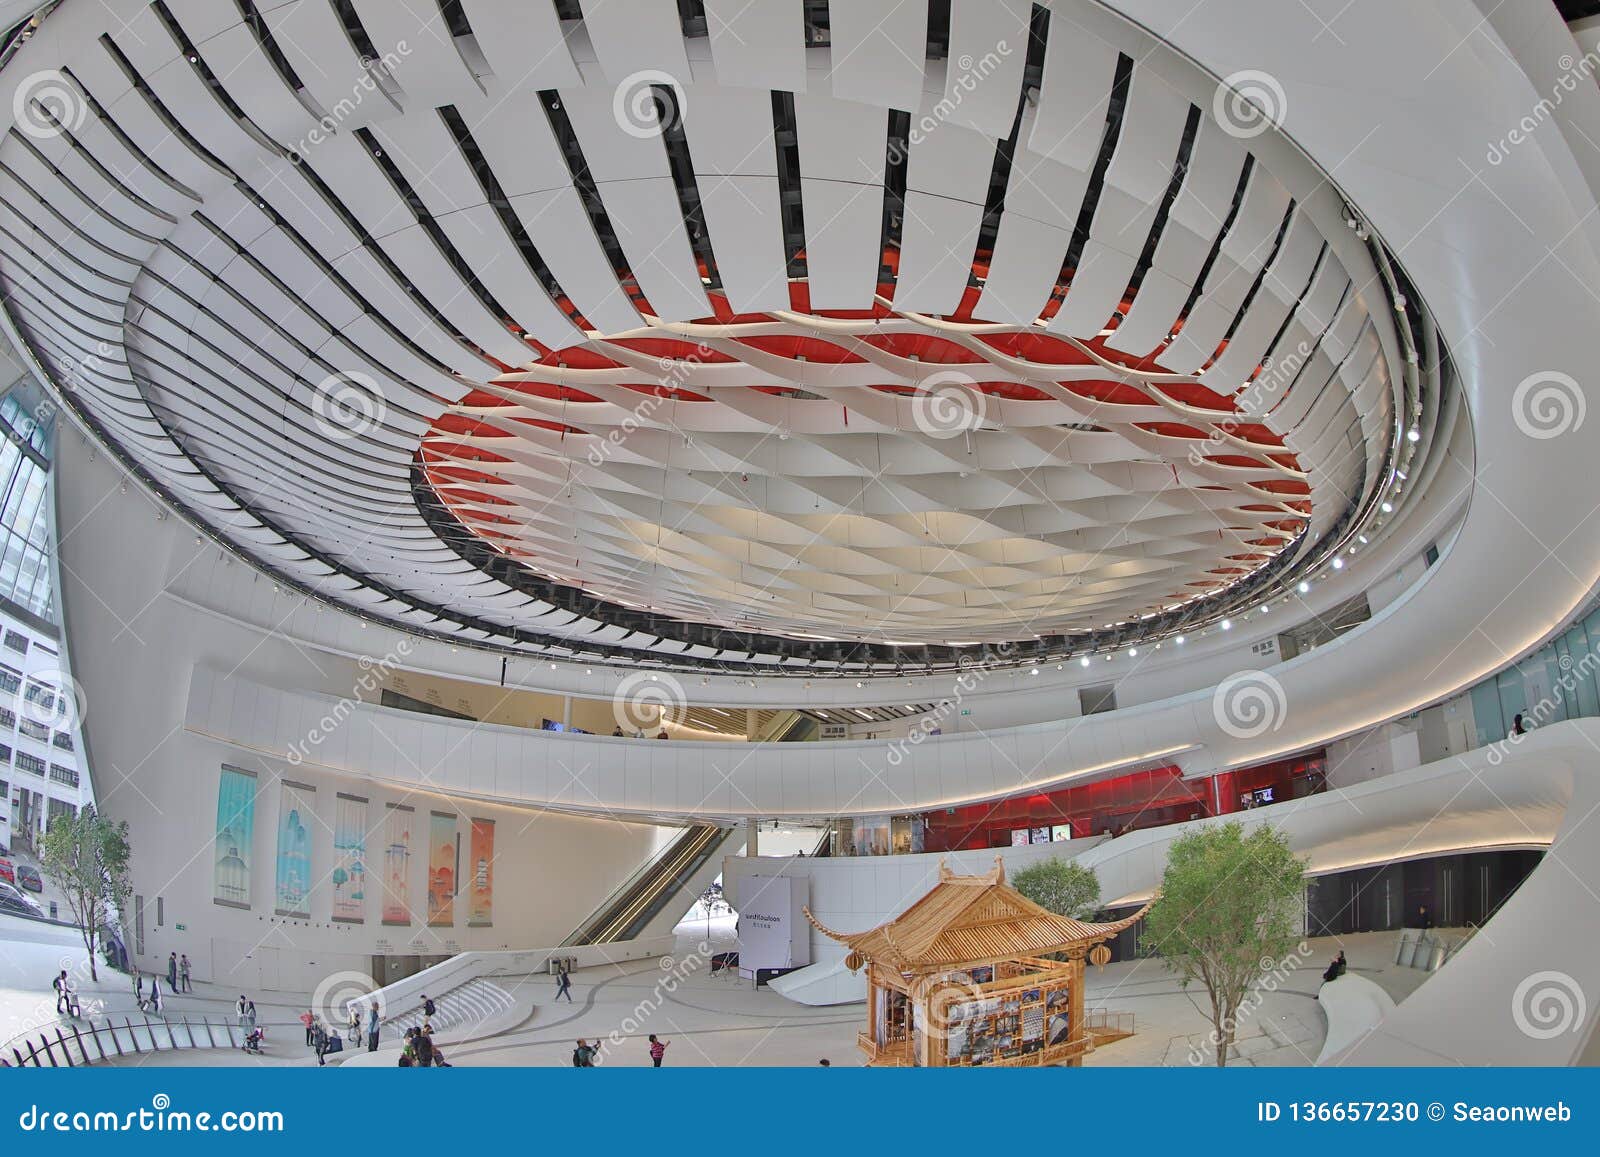 Modern Hall Ceiling Design In Opera House Editorial Image